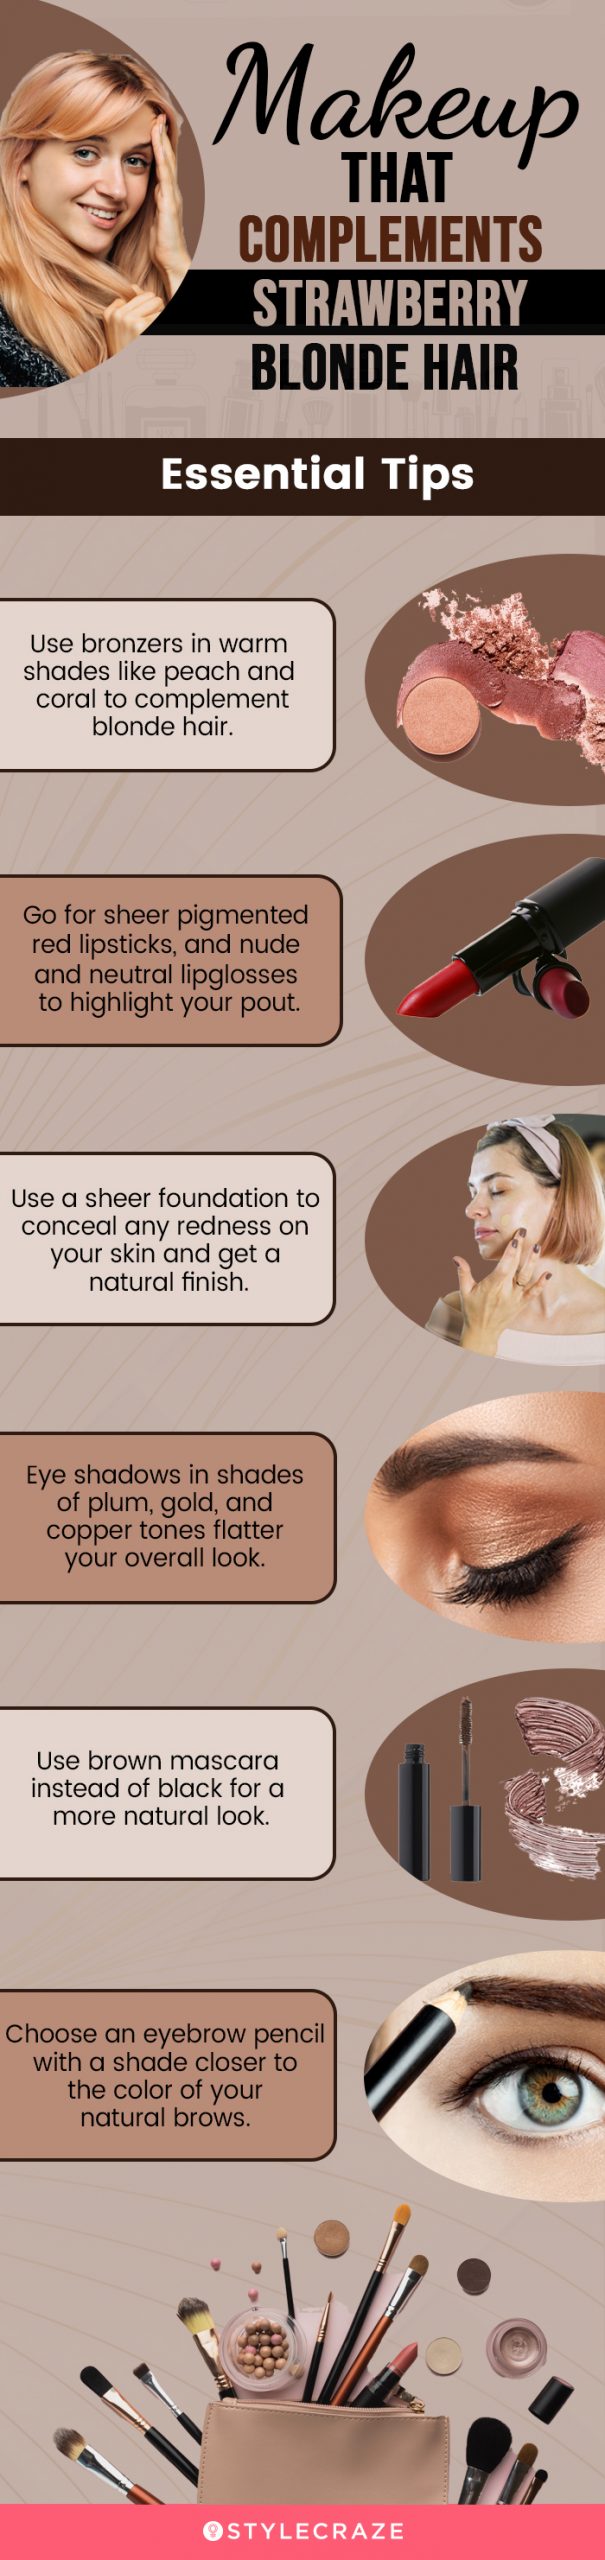 makeup that complements strawberry blonde hair [infographic]